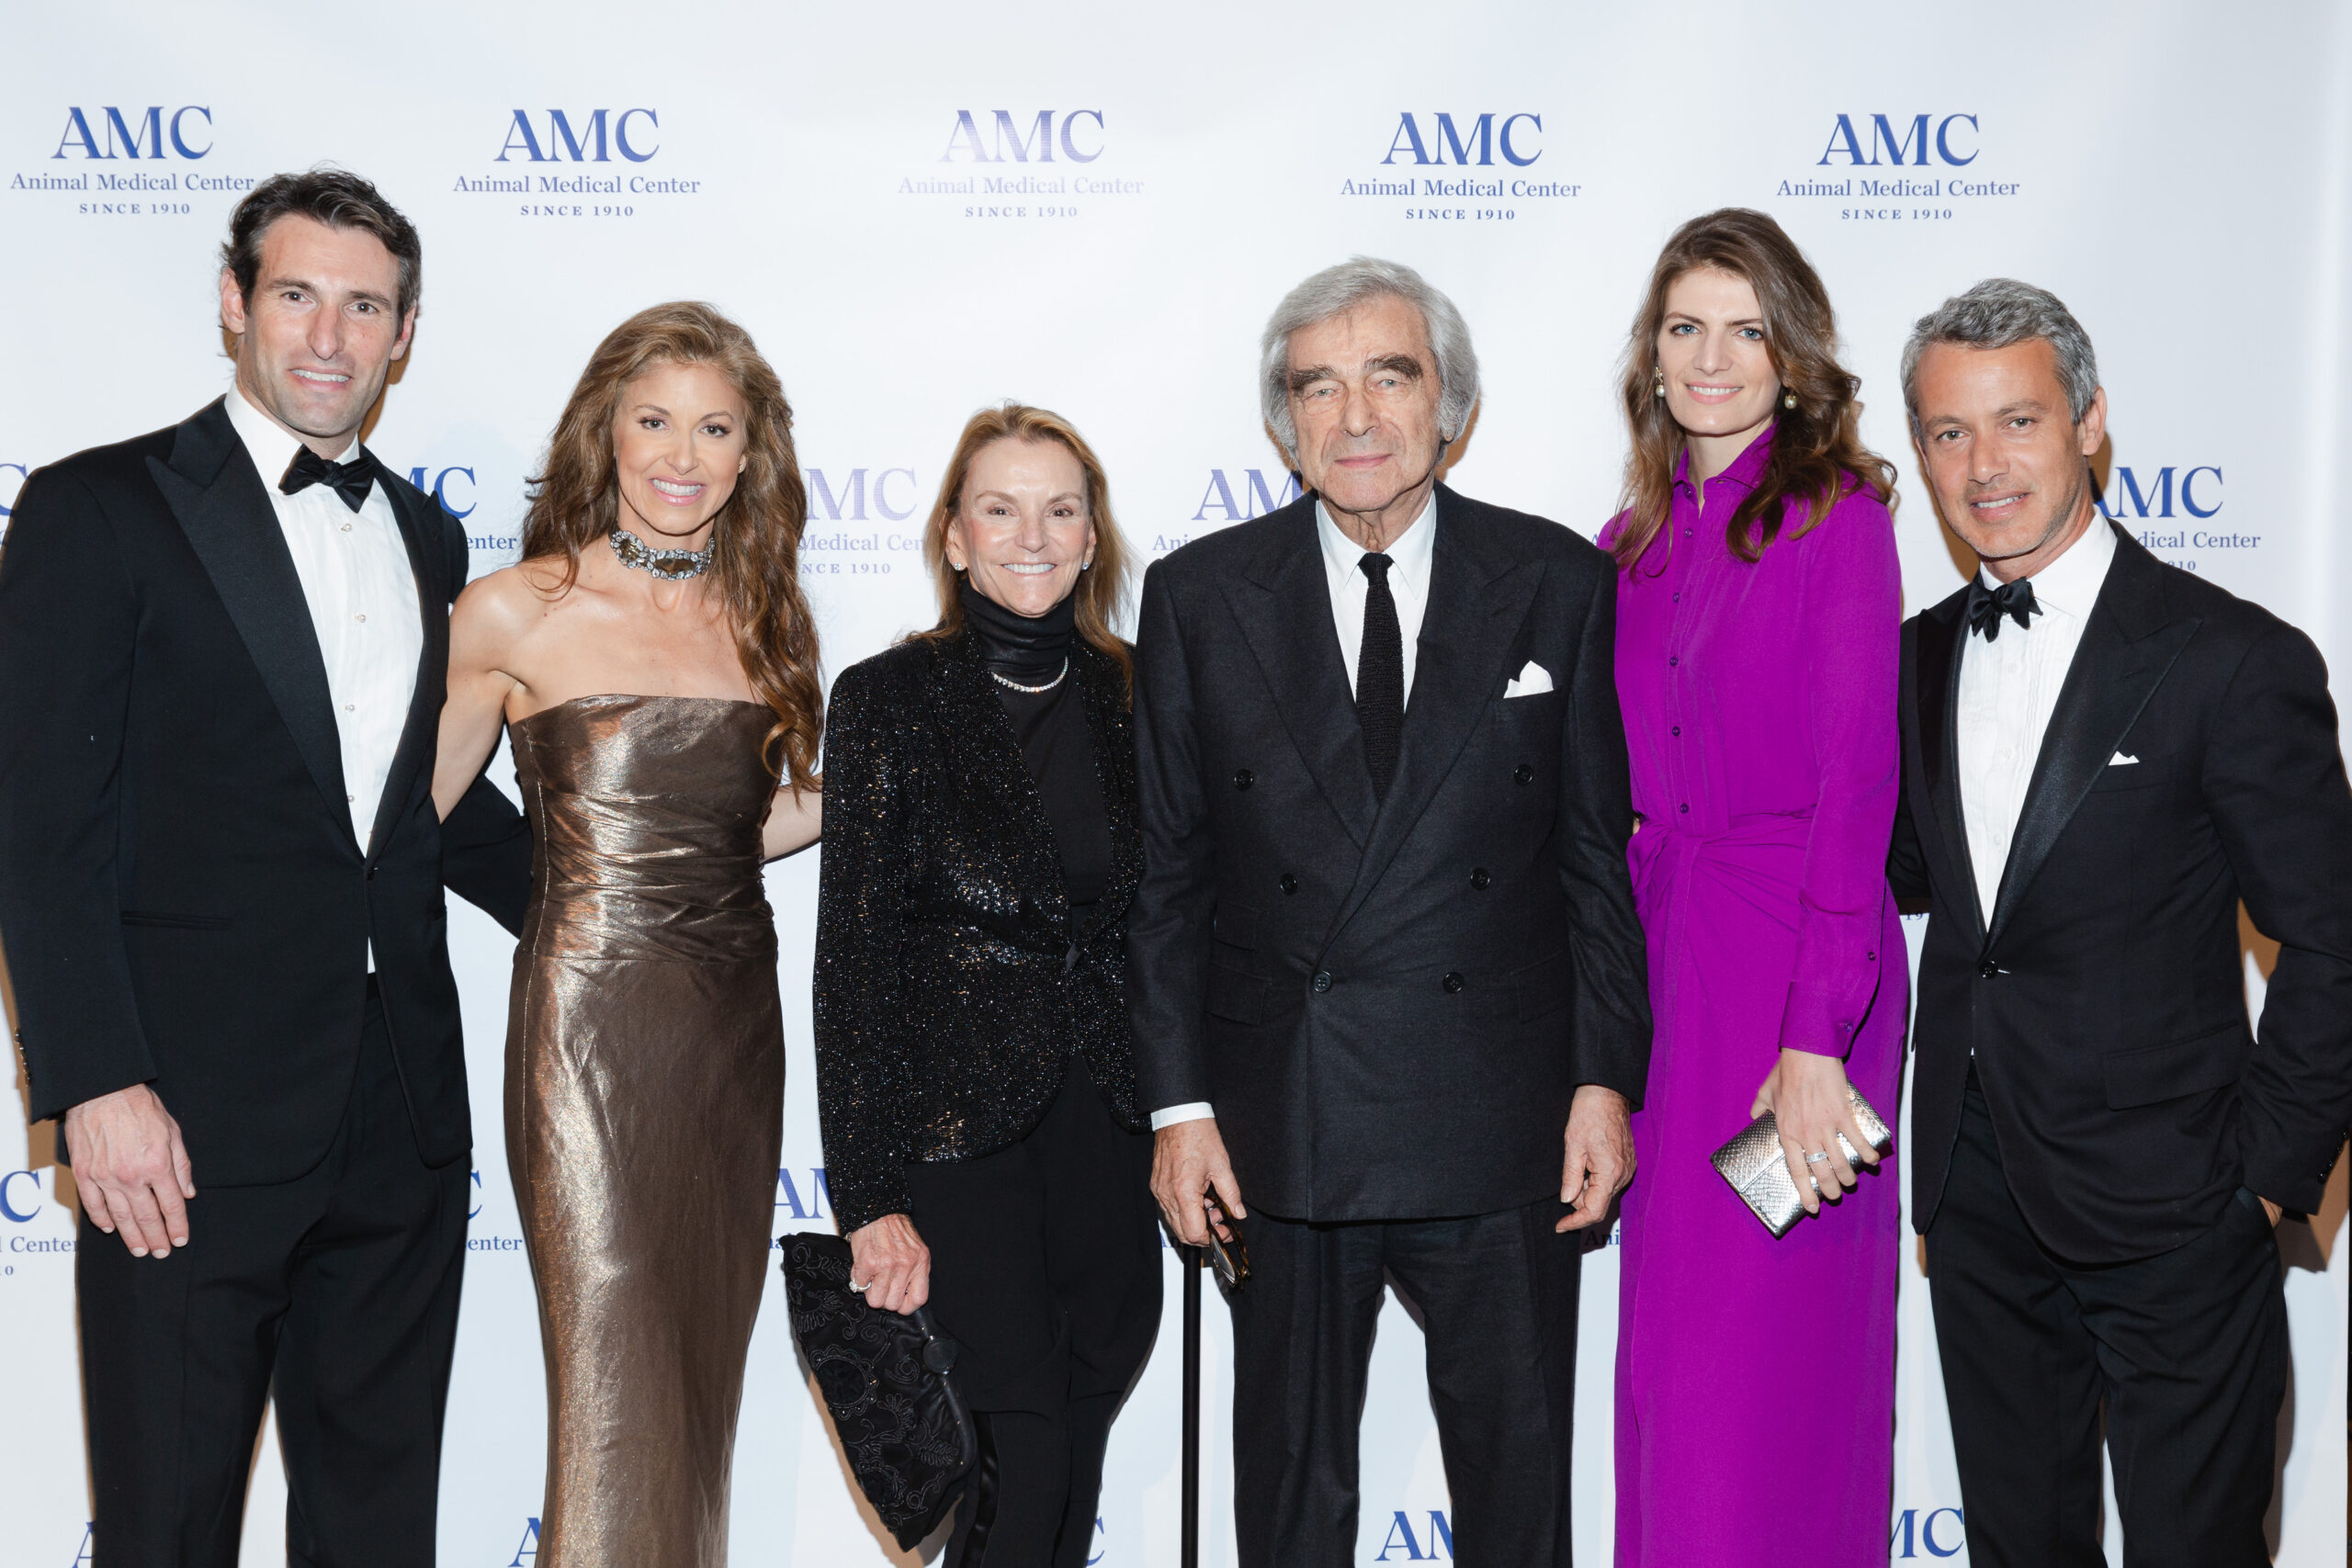 Dylan Lauren poses in front of an AMC backdrop with her family